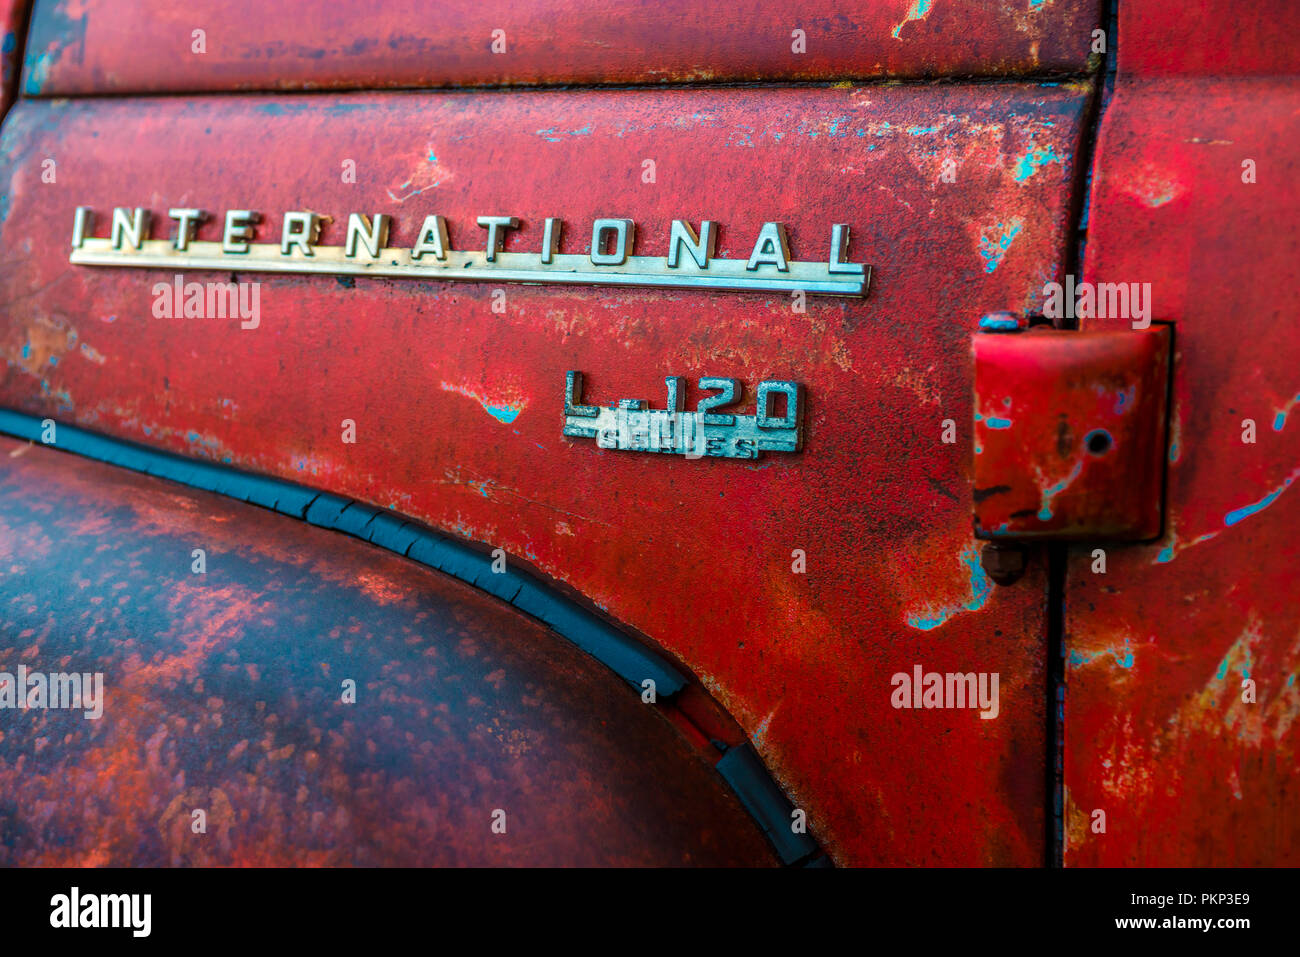 International L-120 red pickup truck in Texas USA Stock Photo